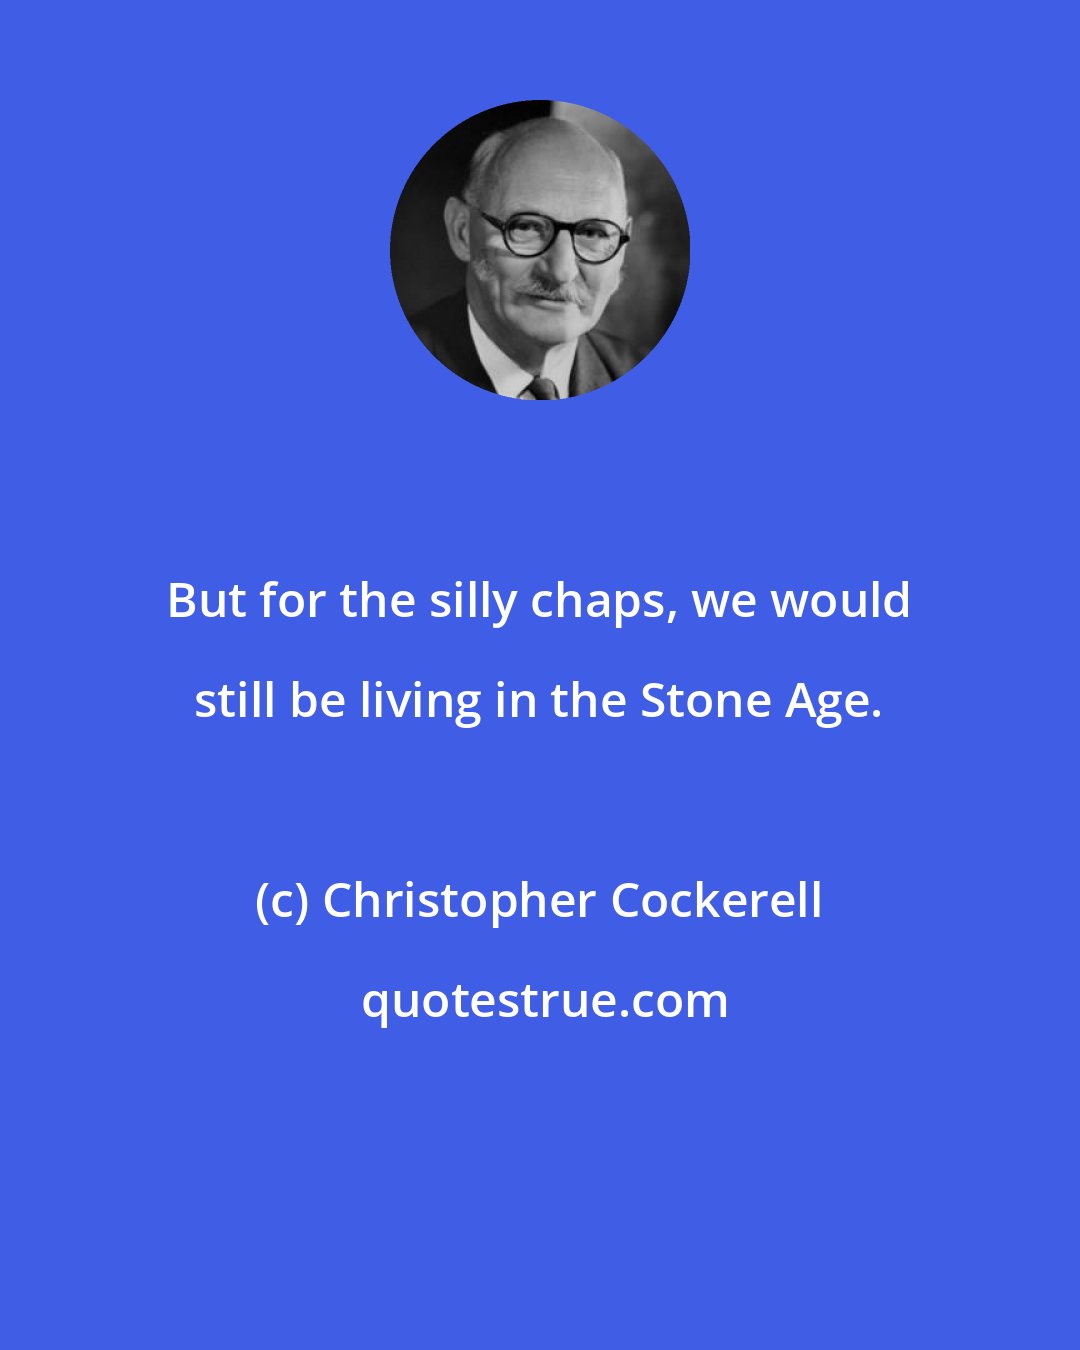 Christopher Cockerell: But for the silly chaps, we would still be living in the Stone Age.